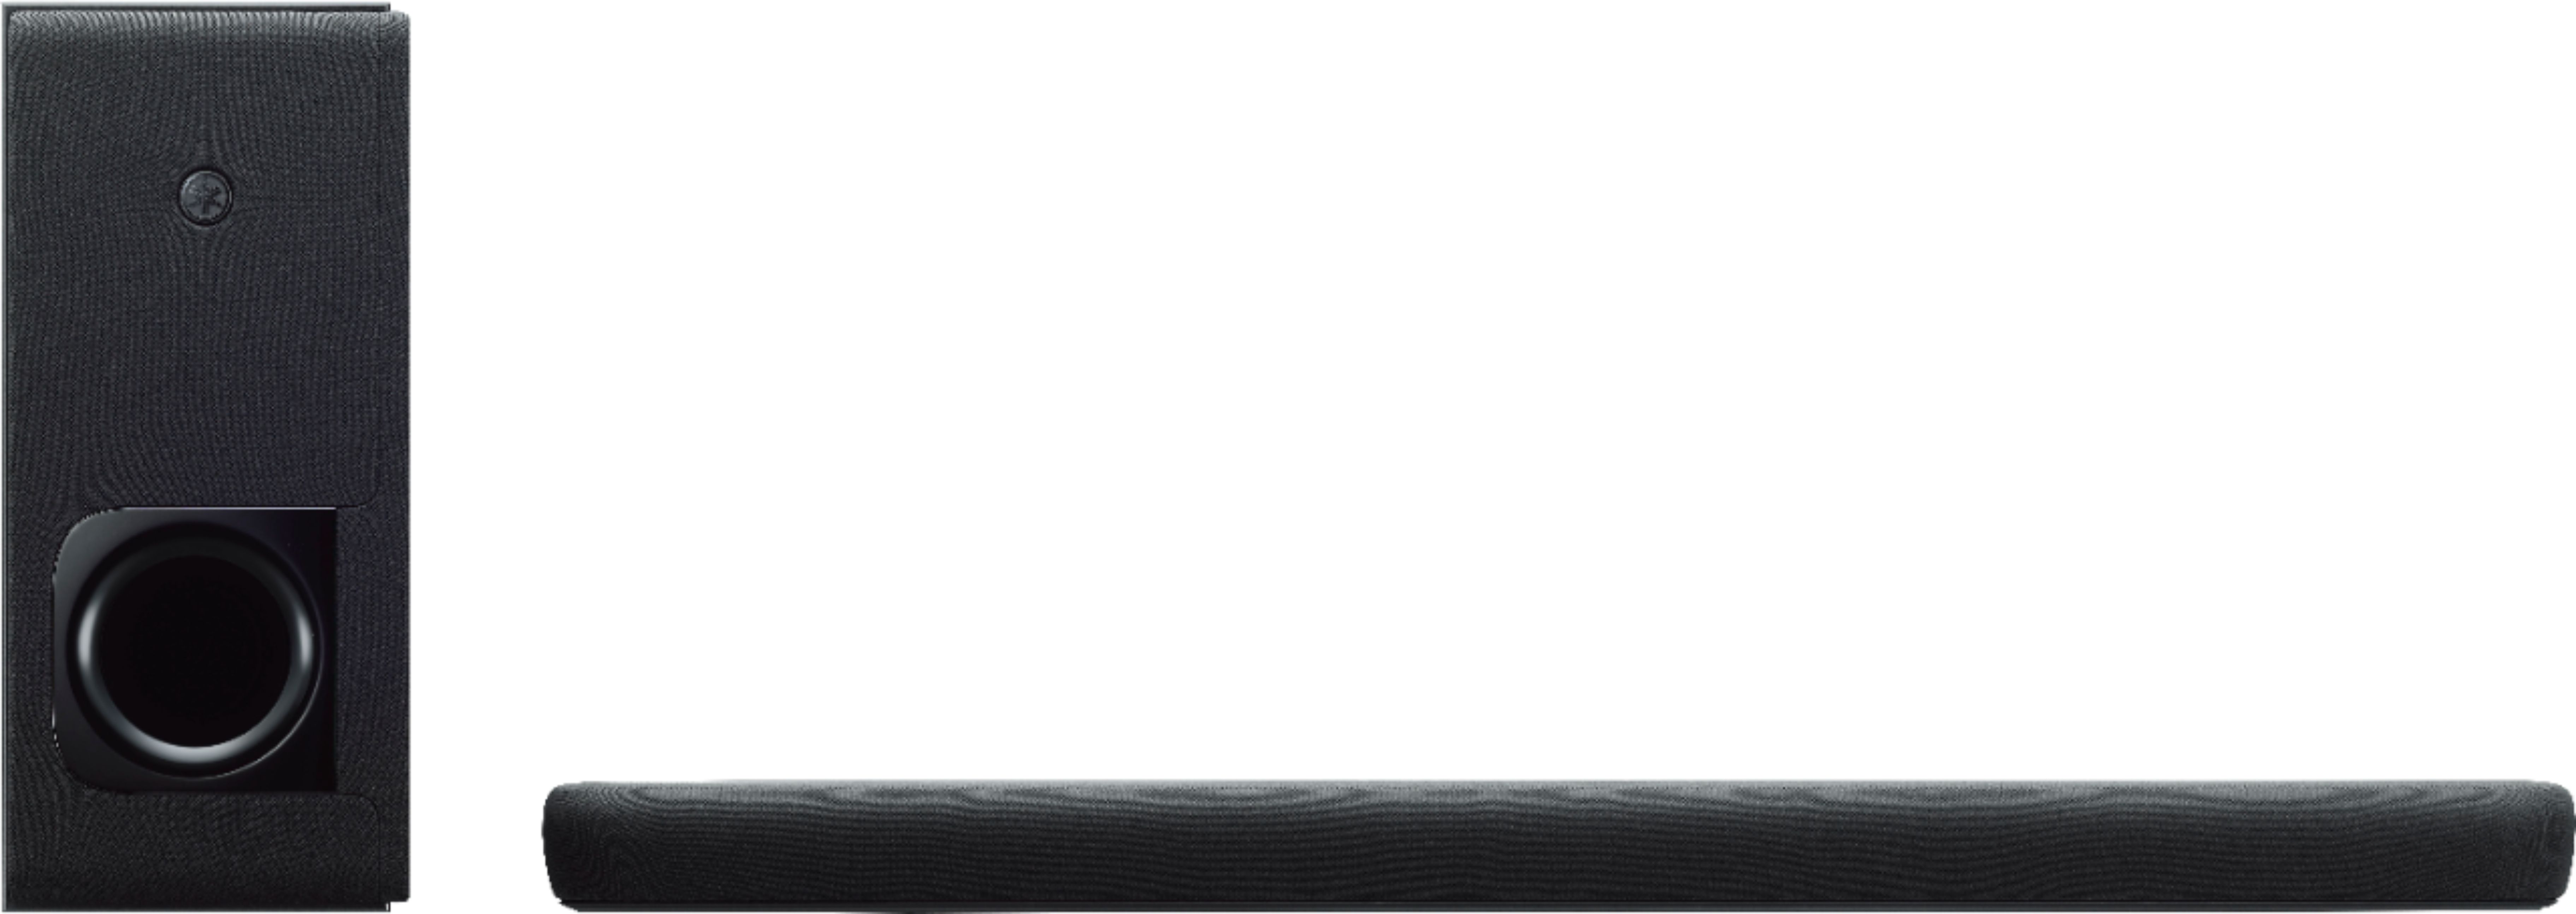 Best Buy: Yamaha 2.1-Channel Soundbar with Wireless Subwoofer and